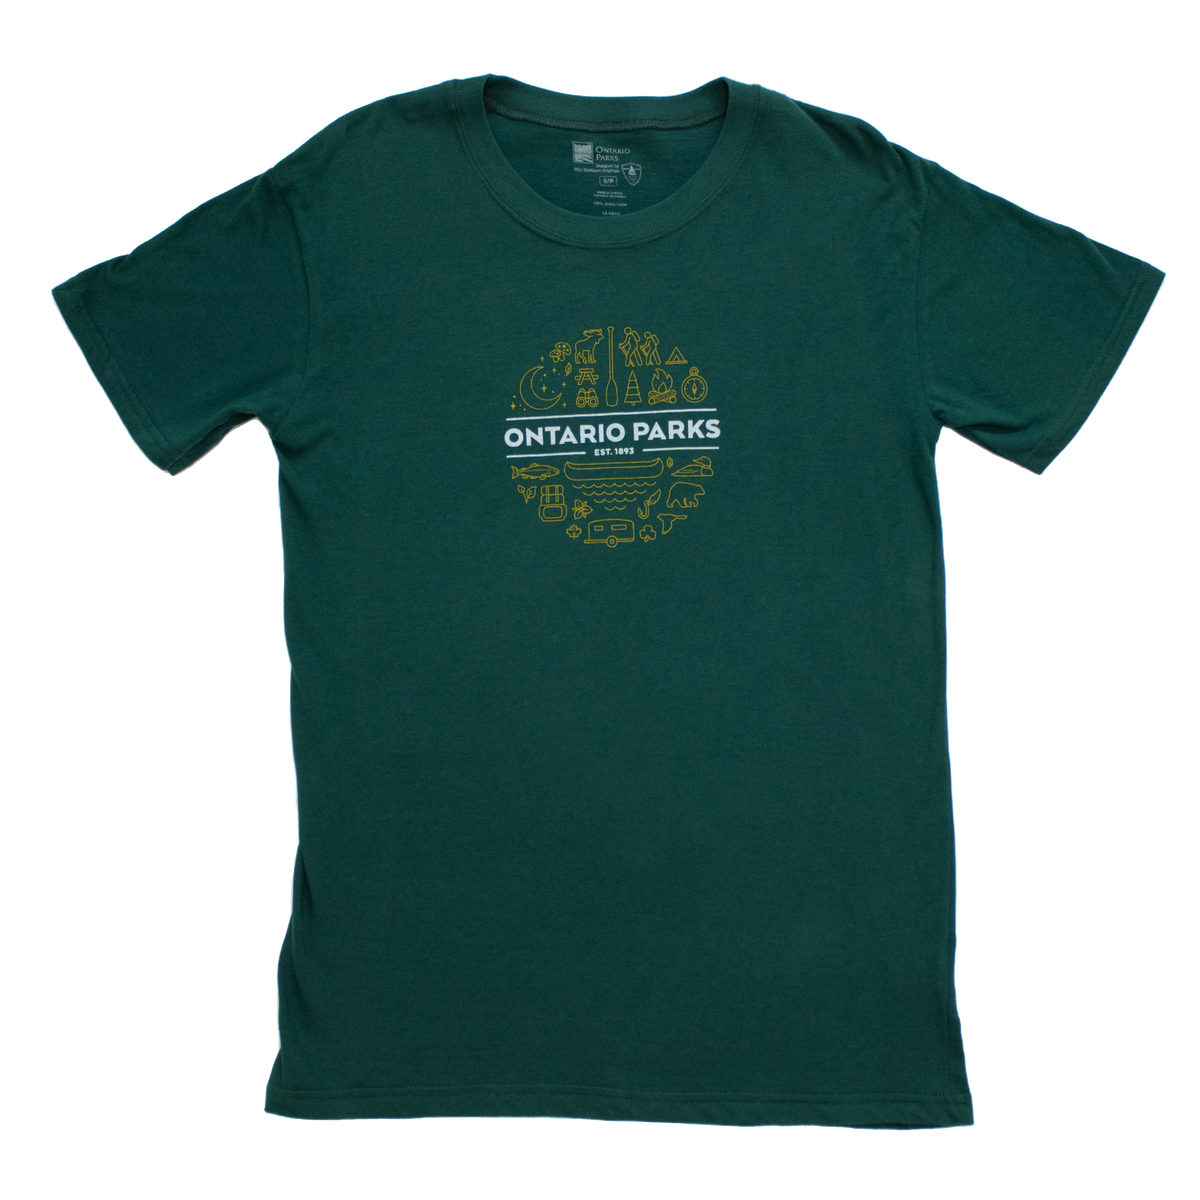 A tealy-green t-shirt with a yellow circle design filled with northern symbols like a moose, paddle, canoe, trailer, etc. Says "Ontario Parks est. 1893" in the centre. 